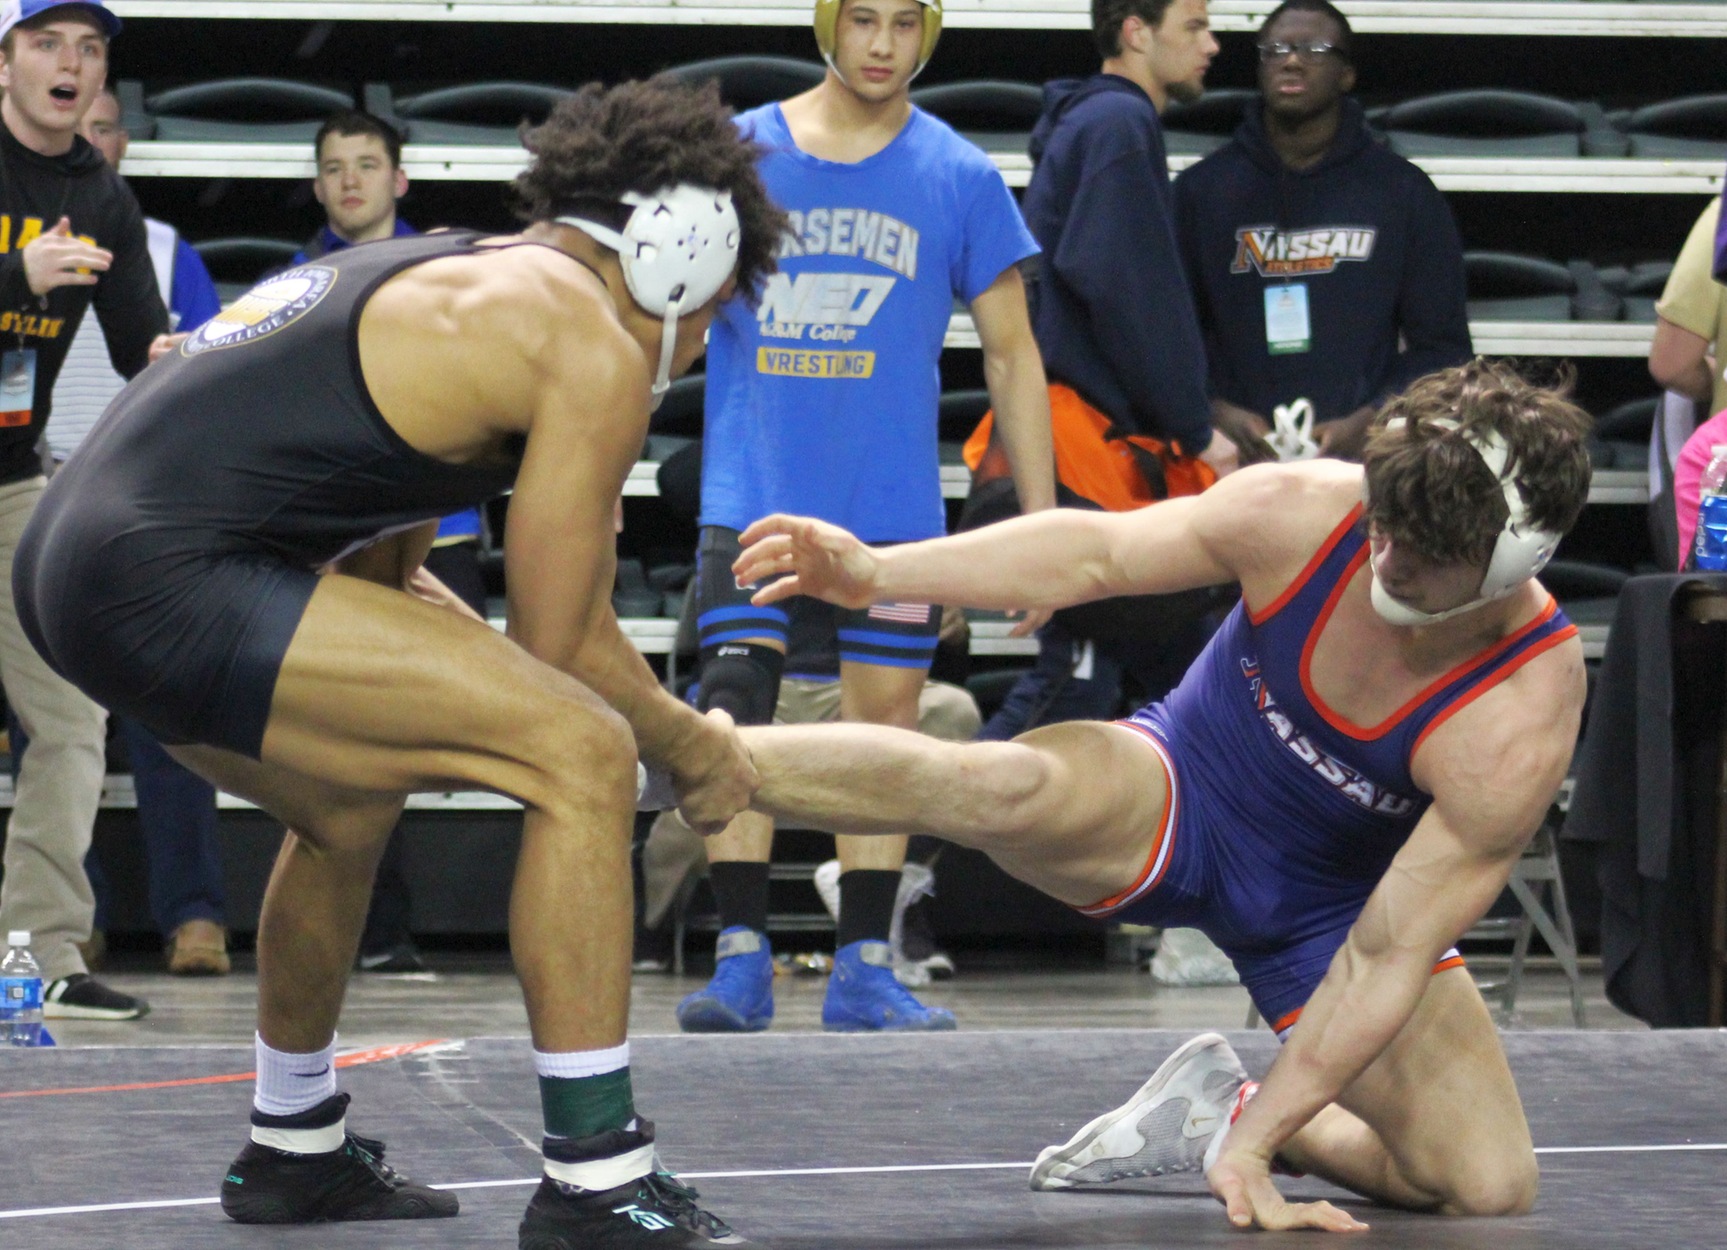 NIACC's Christian Minto pulls the leg of Nassau's Paul Illicete in Friday's 165-pound quarterfinal match Friday.